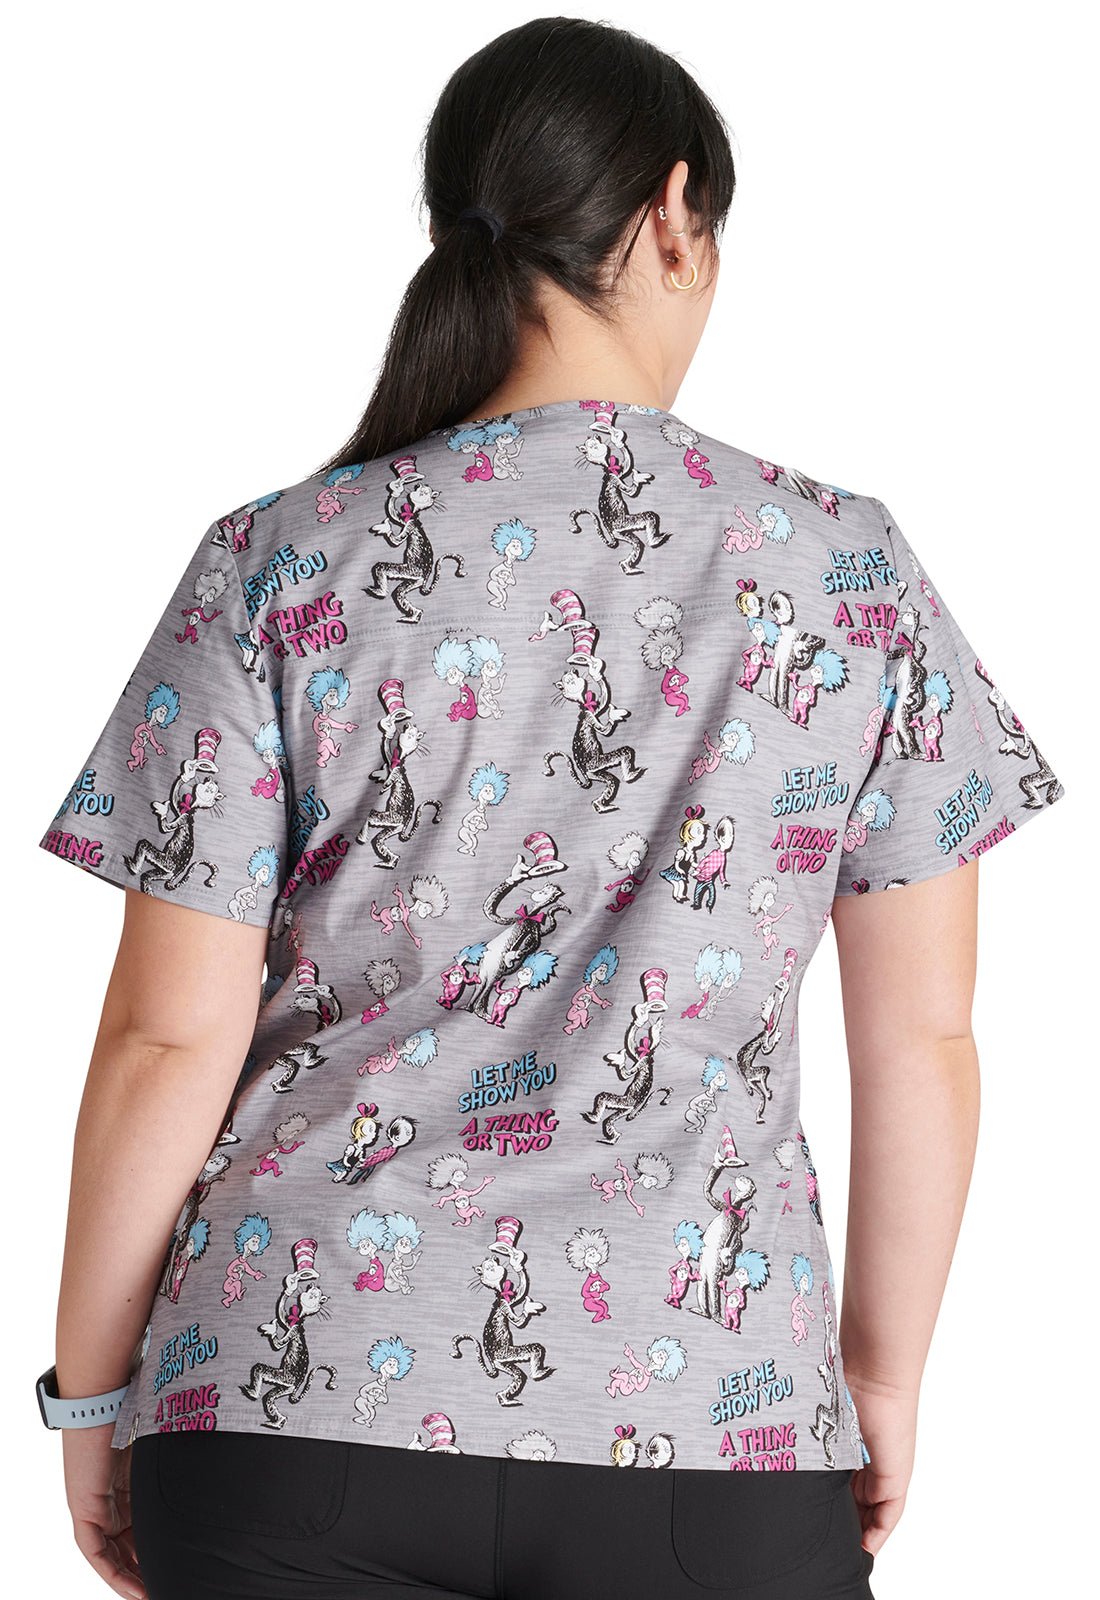 A Thing Or Two Cherokee Tooniforms Licensed Dr. Seuss V Neck Scrub Top TF738 SEAT - Scrubs Select